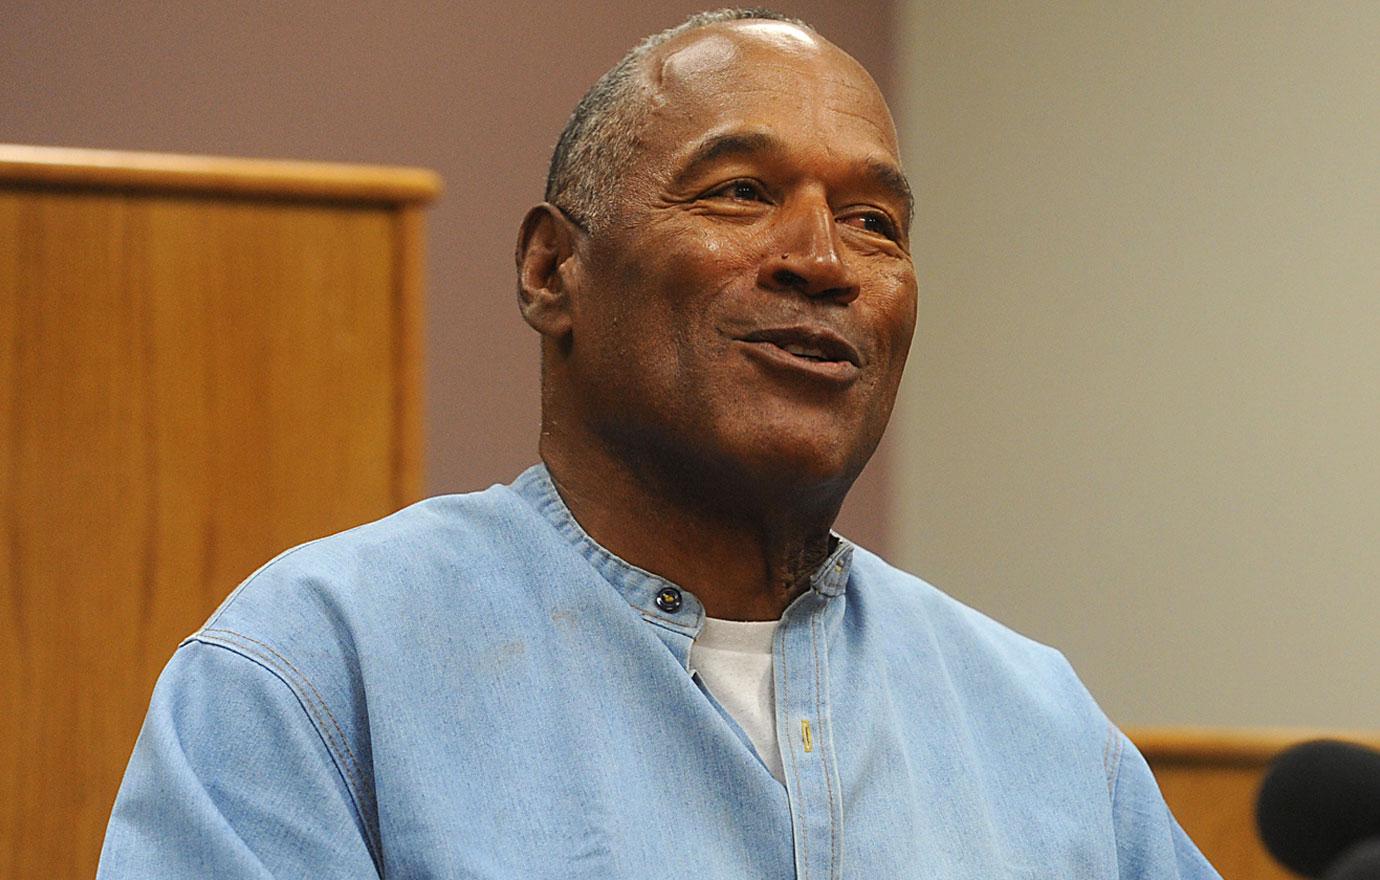 O.J. Simpson Plans To Eat Steak & Buy iPhone After Prison Release